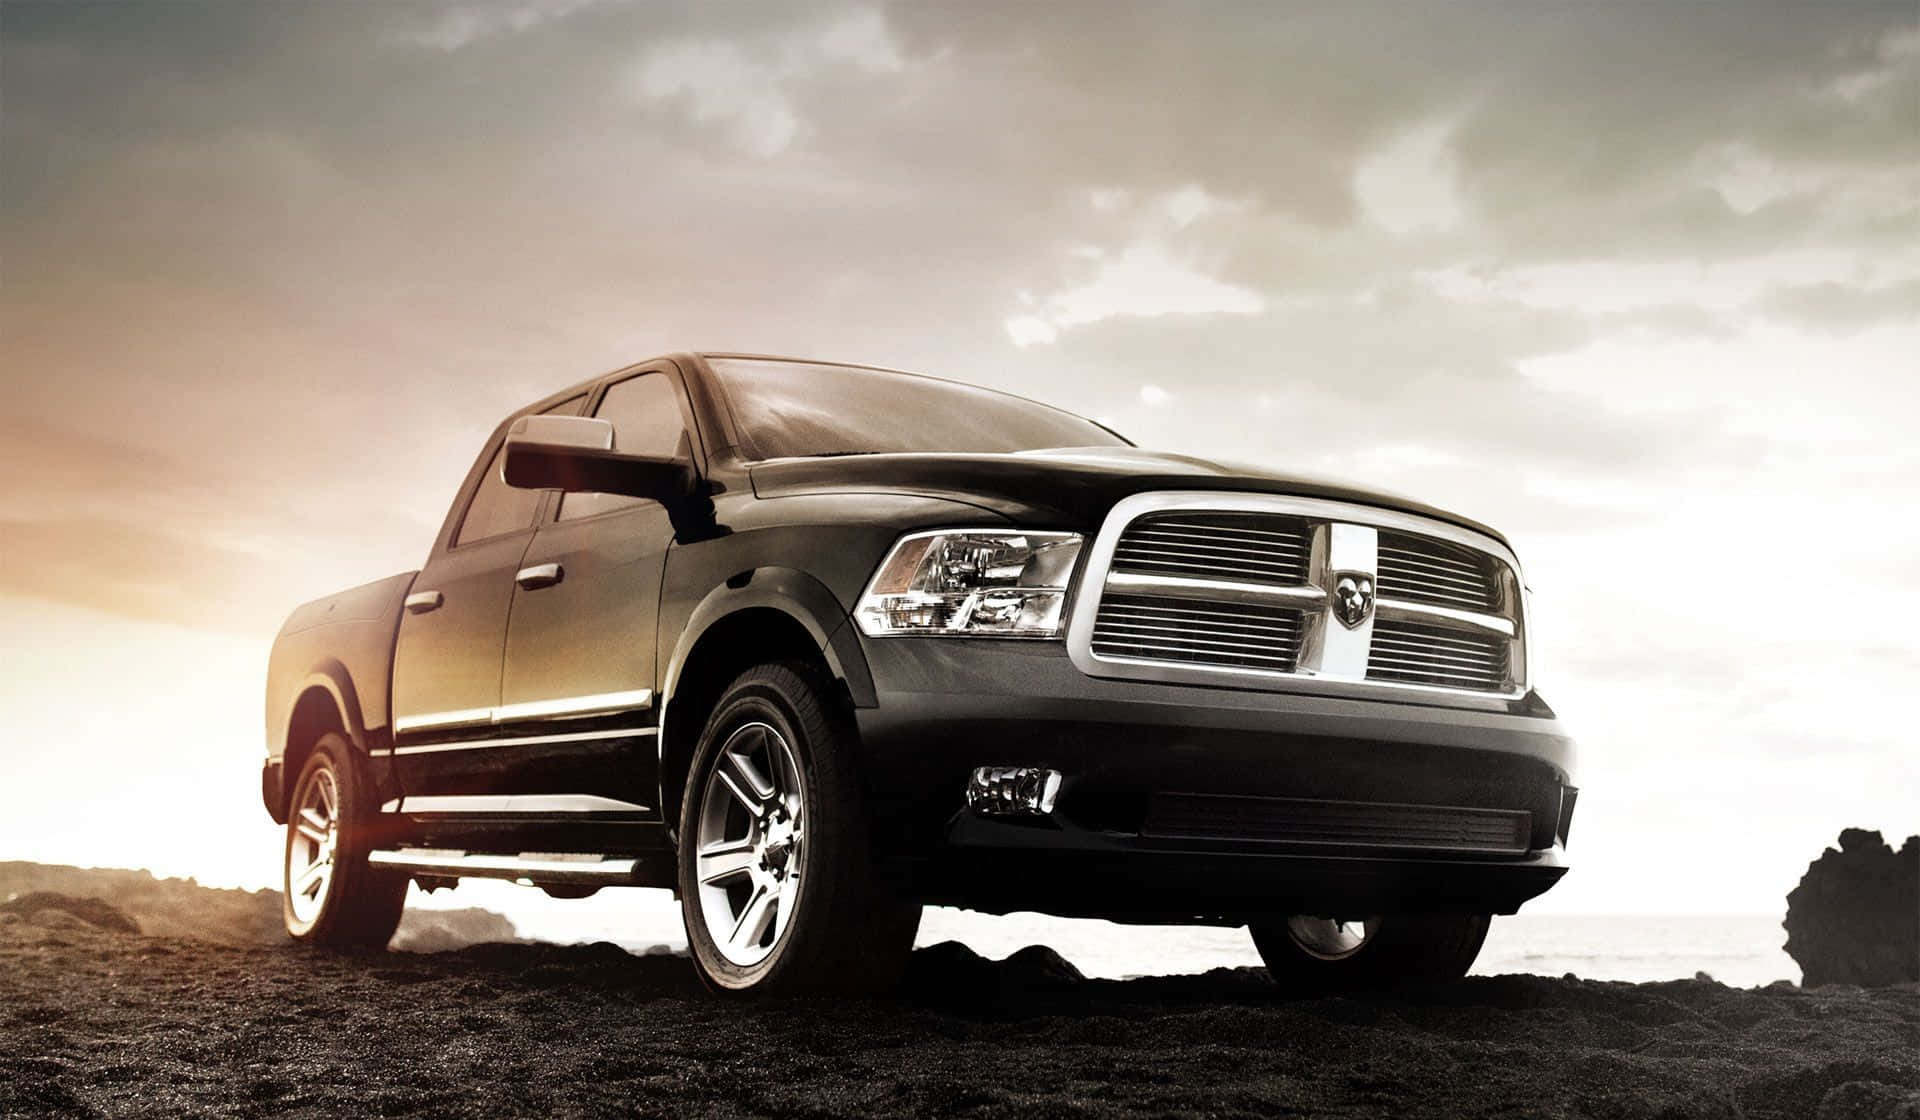 A Stunning Display Of Power - Dodge Ram In Its Full Glory. Wallpaper